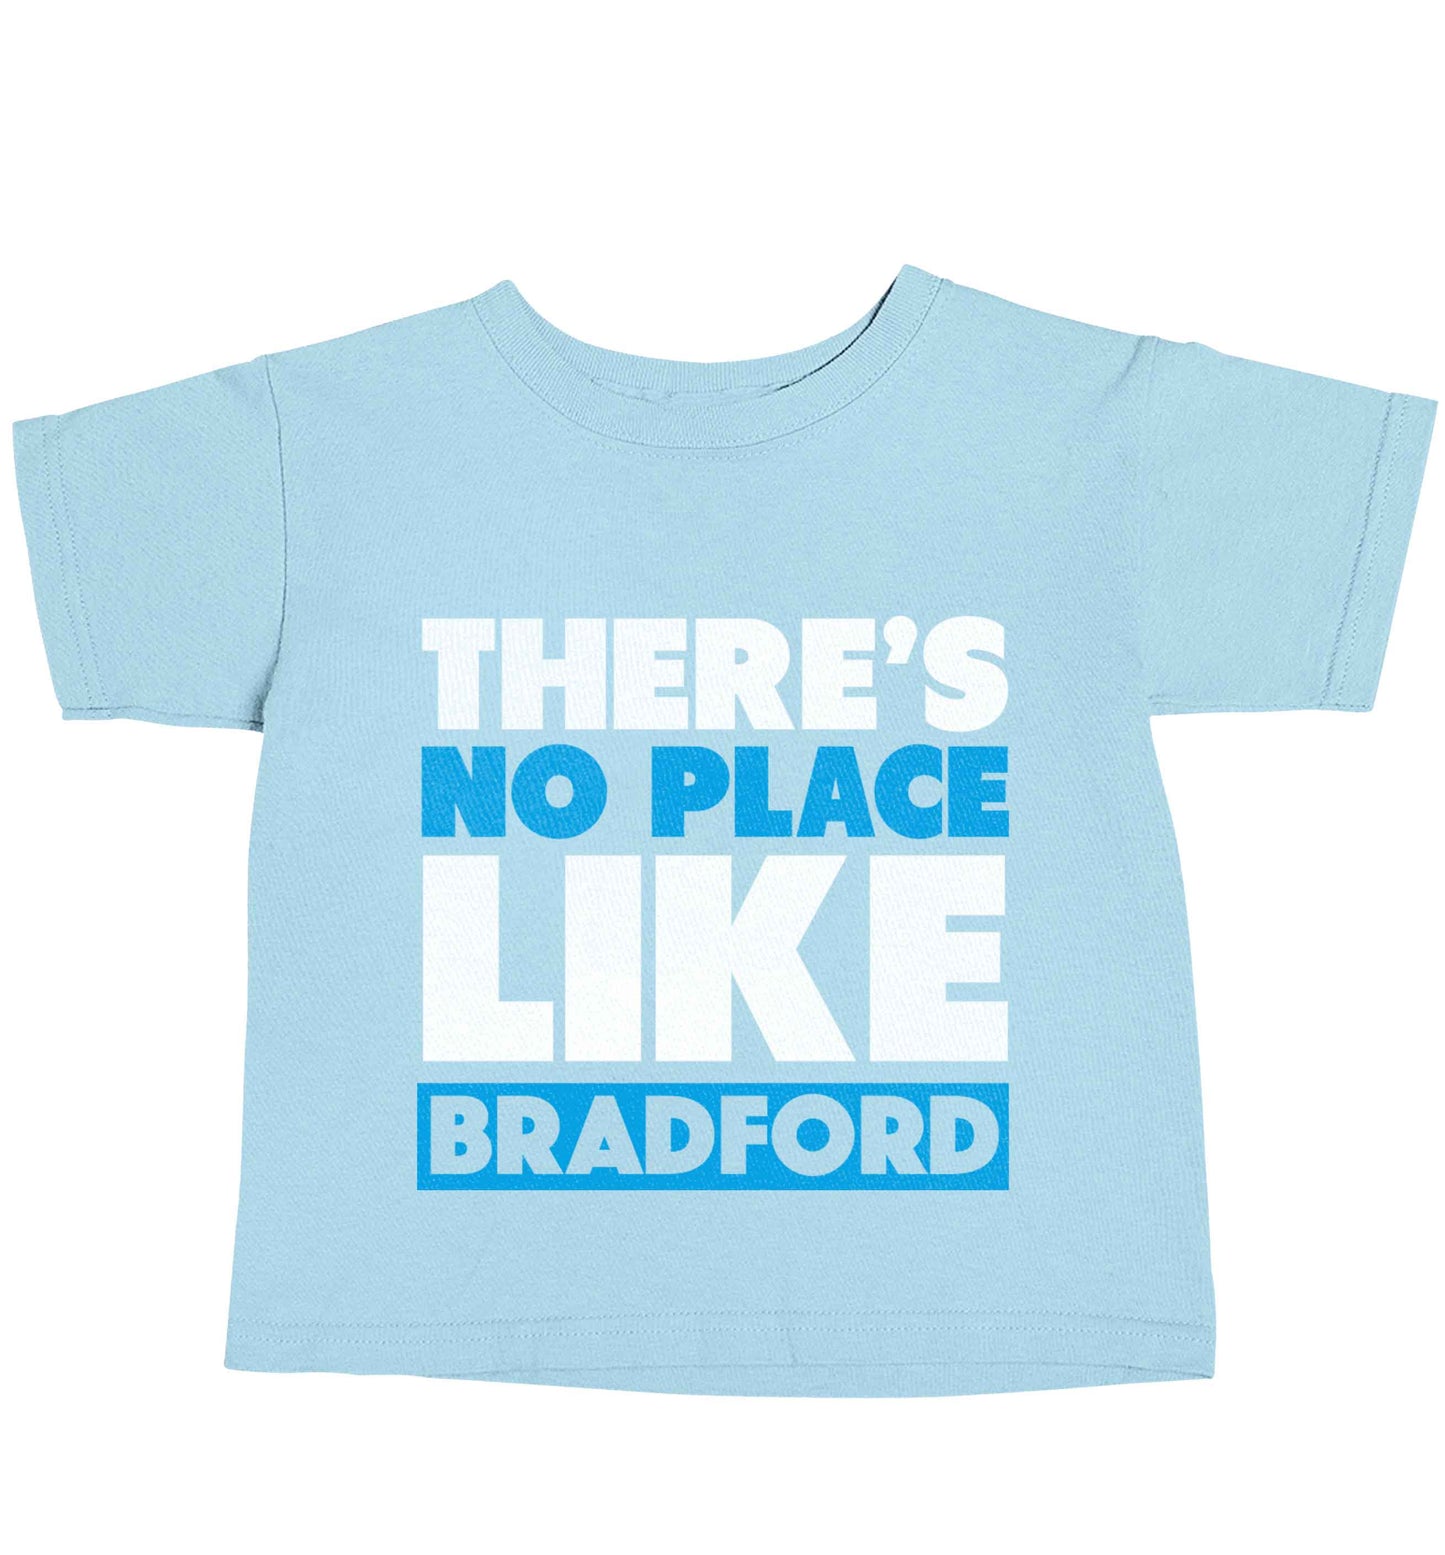 There's no place like Bradford light blue baby toddler Tshirt 2 Years